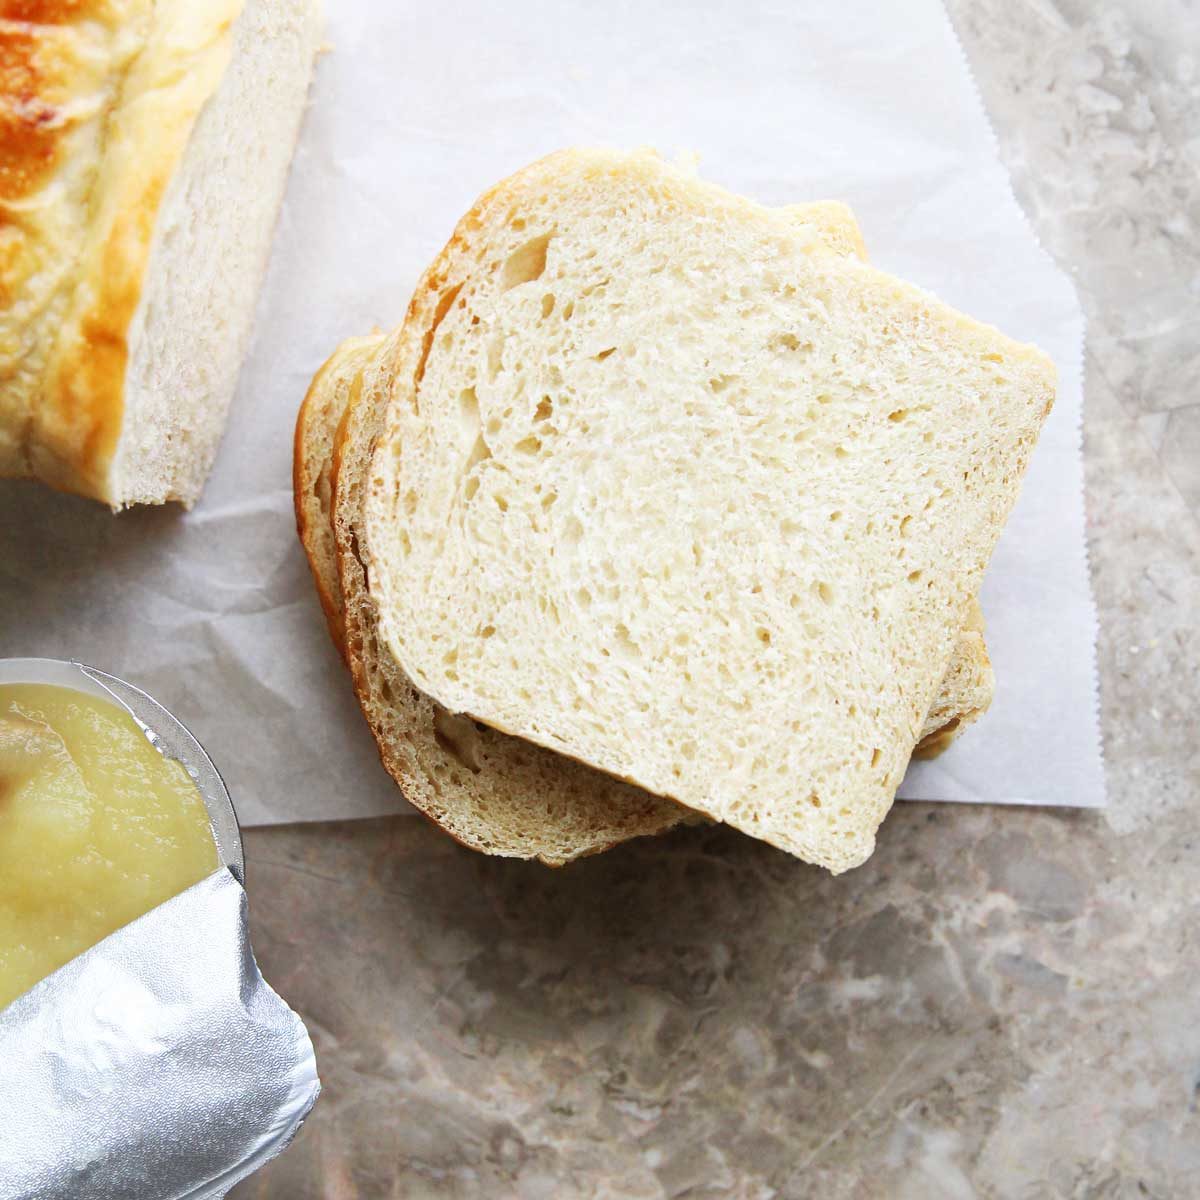 Applesauce Yeast Bread (A Healthier Recipe for White Bread) - applesauce yeast bread